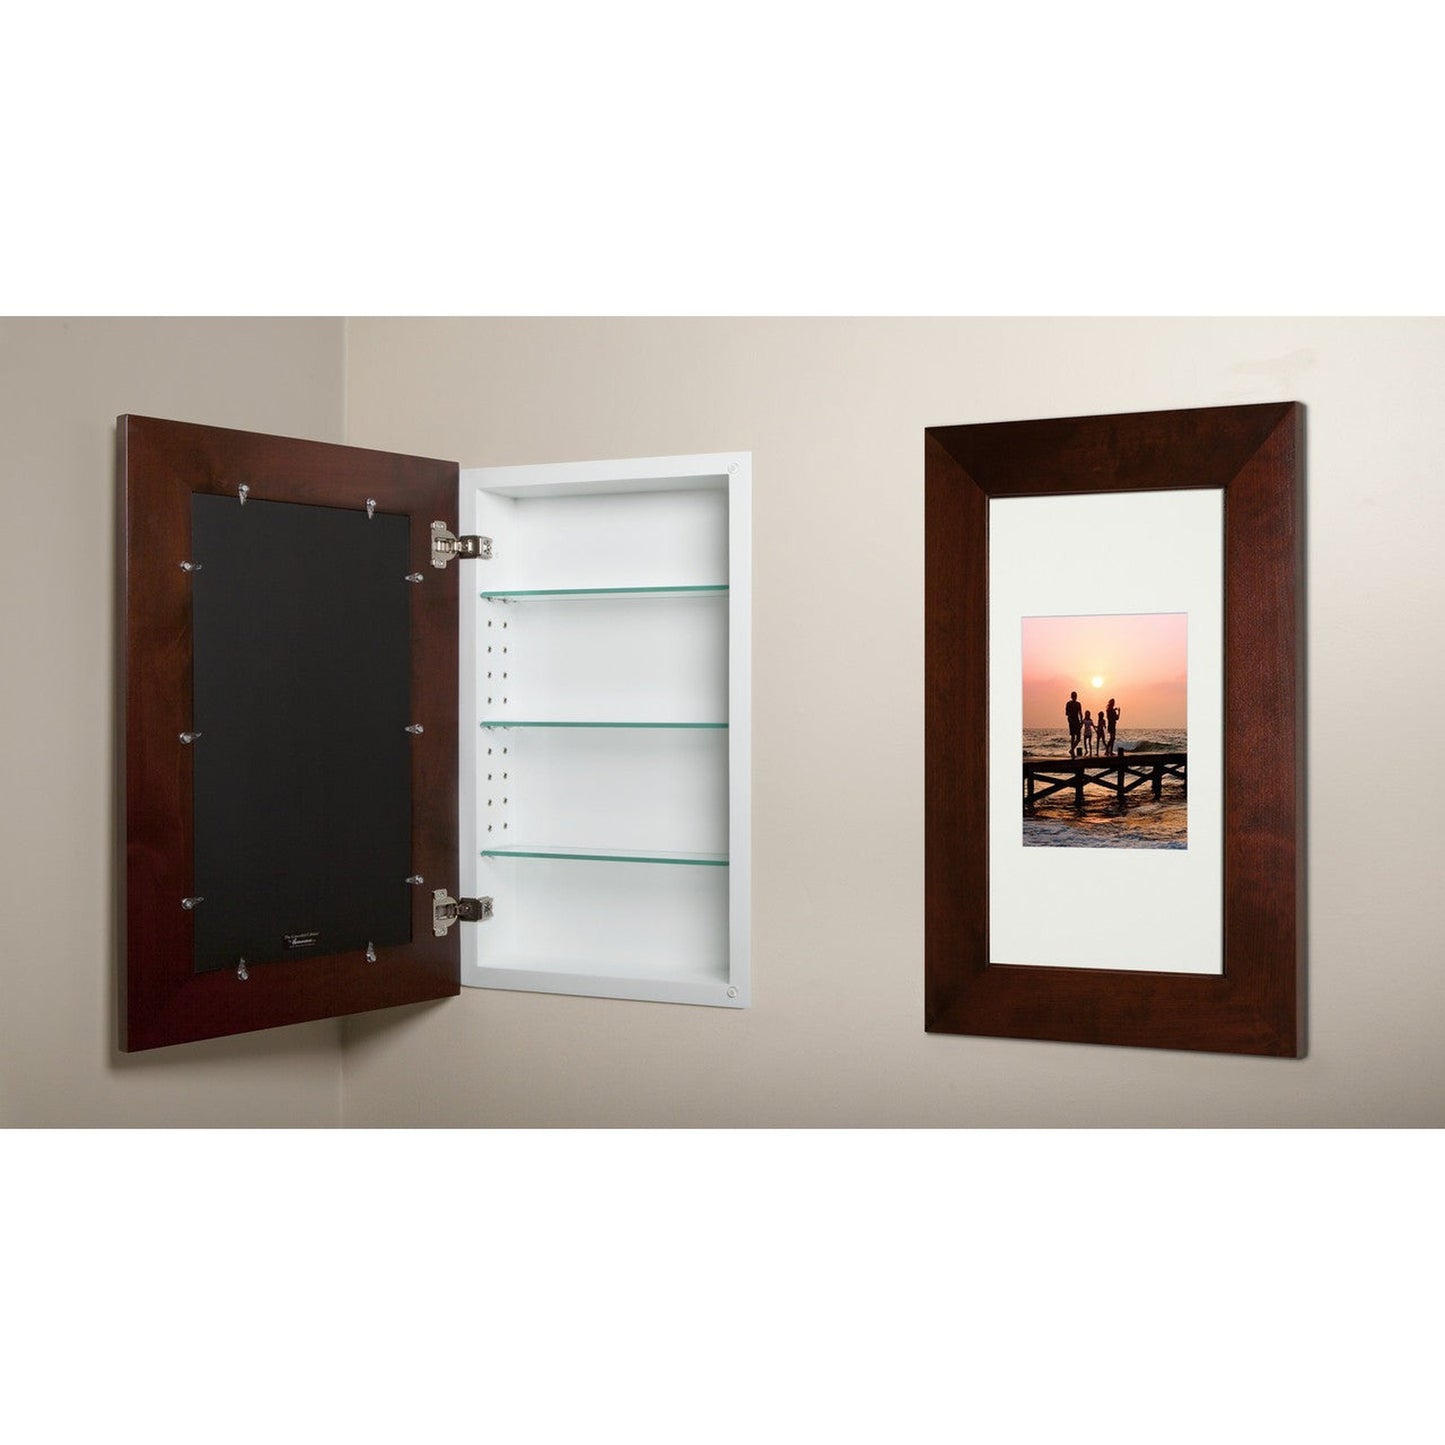 Fox Hollow Furnishings 14" x 24" Espresso Extra Large Special 6" Depth White Interior Recessed Picture Frame Medicine Cabinet